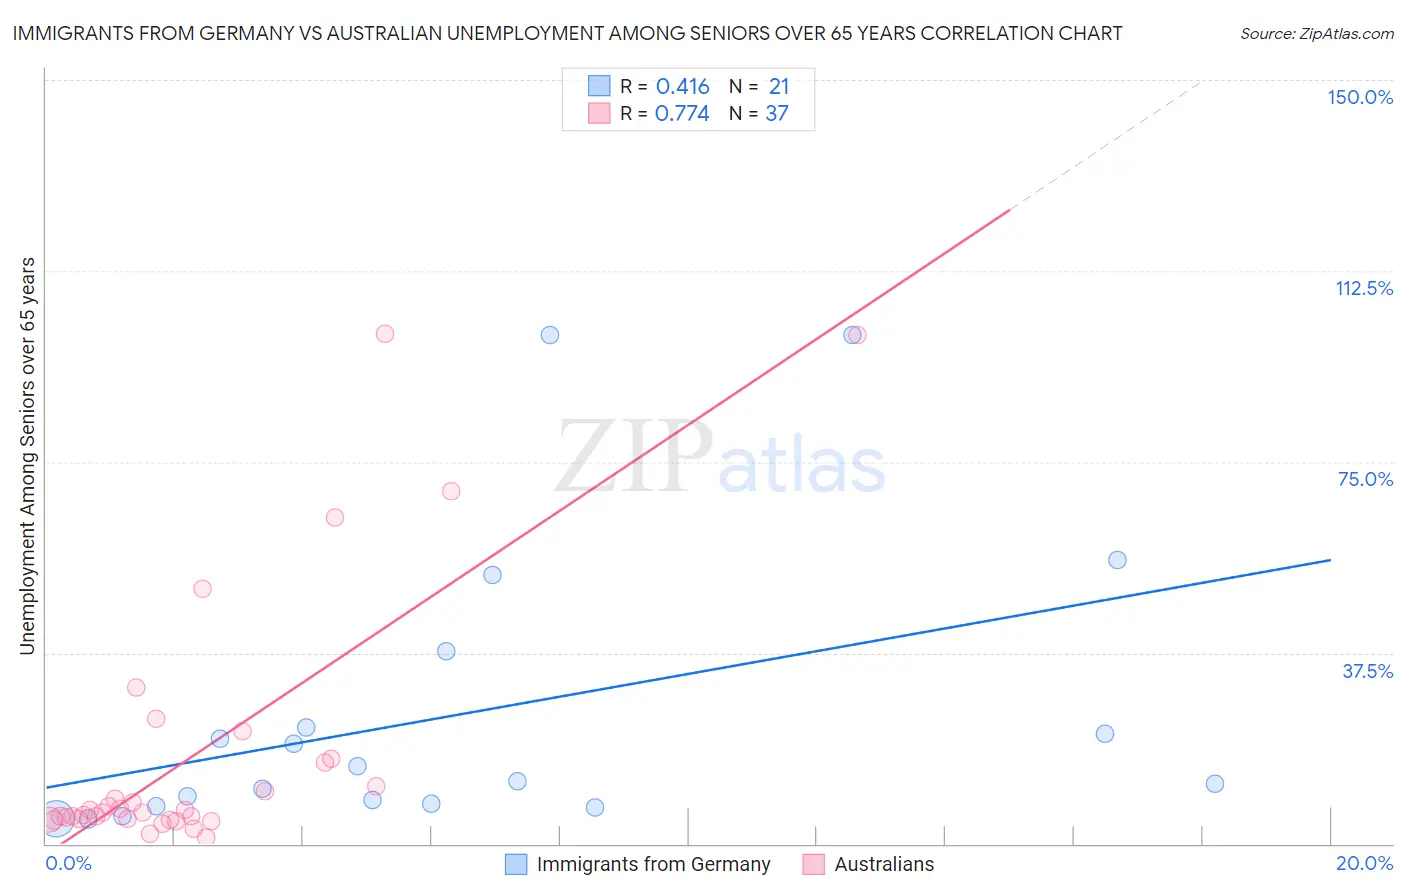 Immigrants from Germany vs Australian Unemployment Among Seniors over 65 years